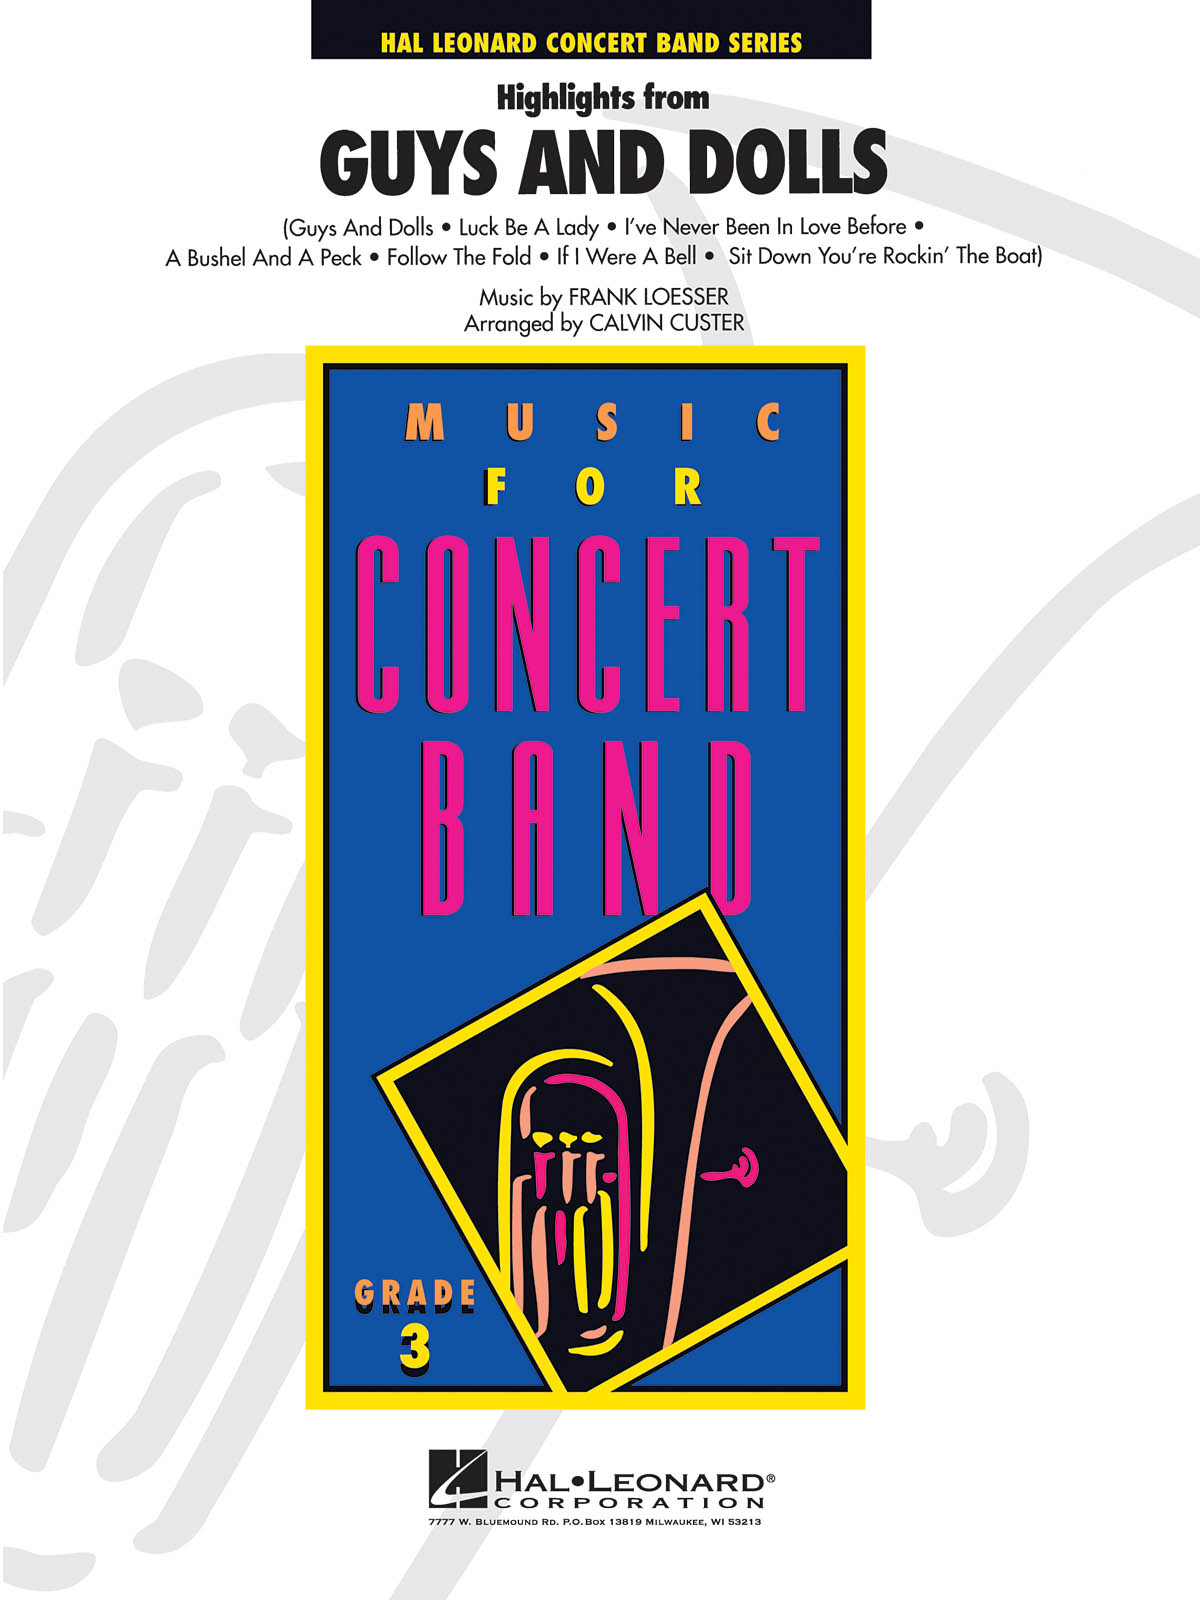 Frank Loesser: Highlights from Guys And Dolls: Concert Band: Score